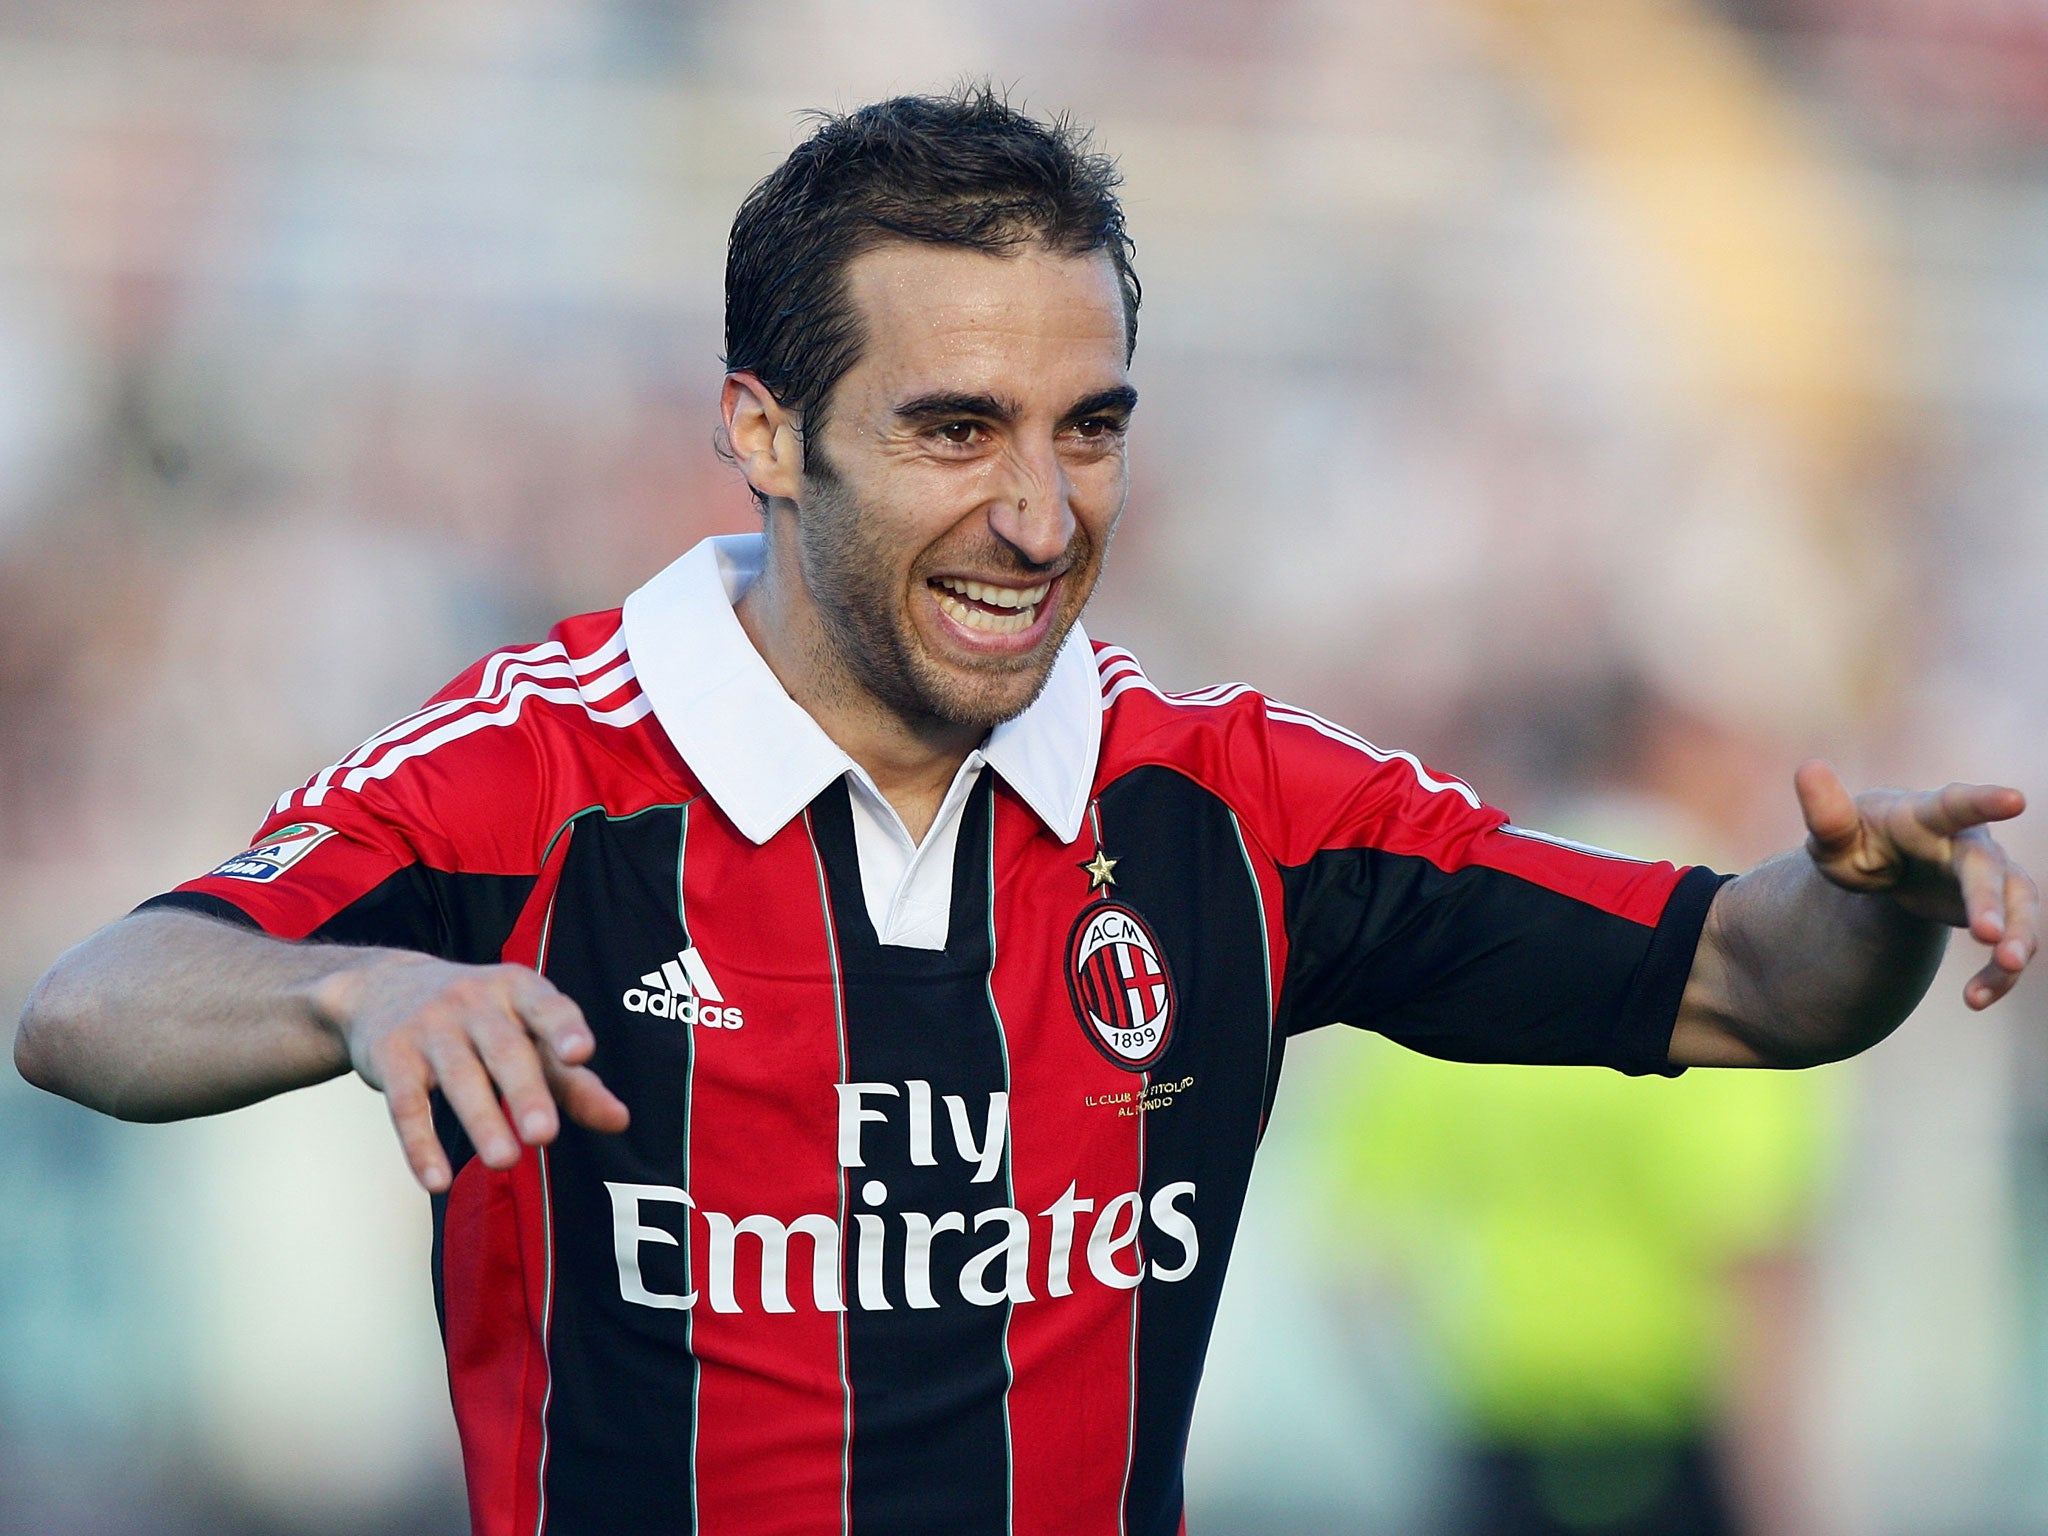 Flamini was released by AC Milan in June